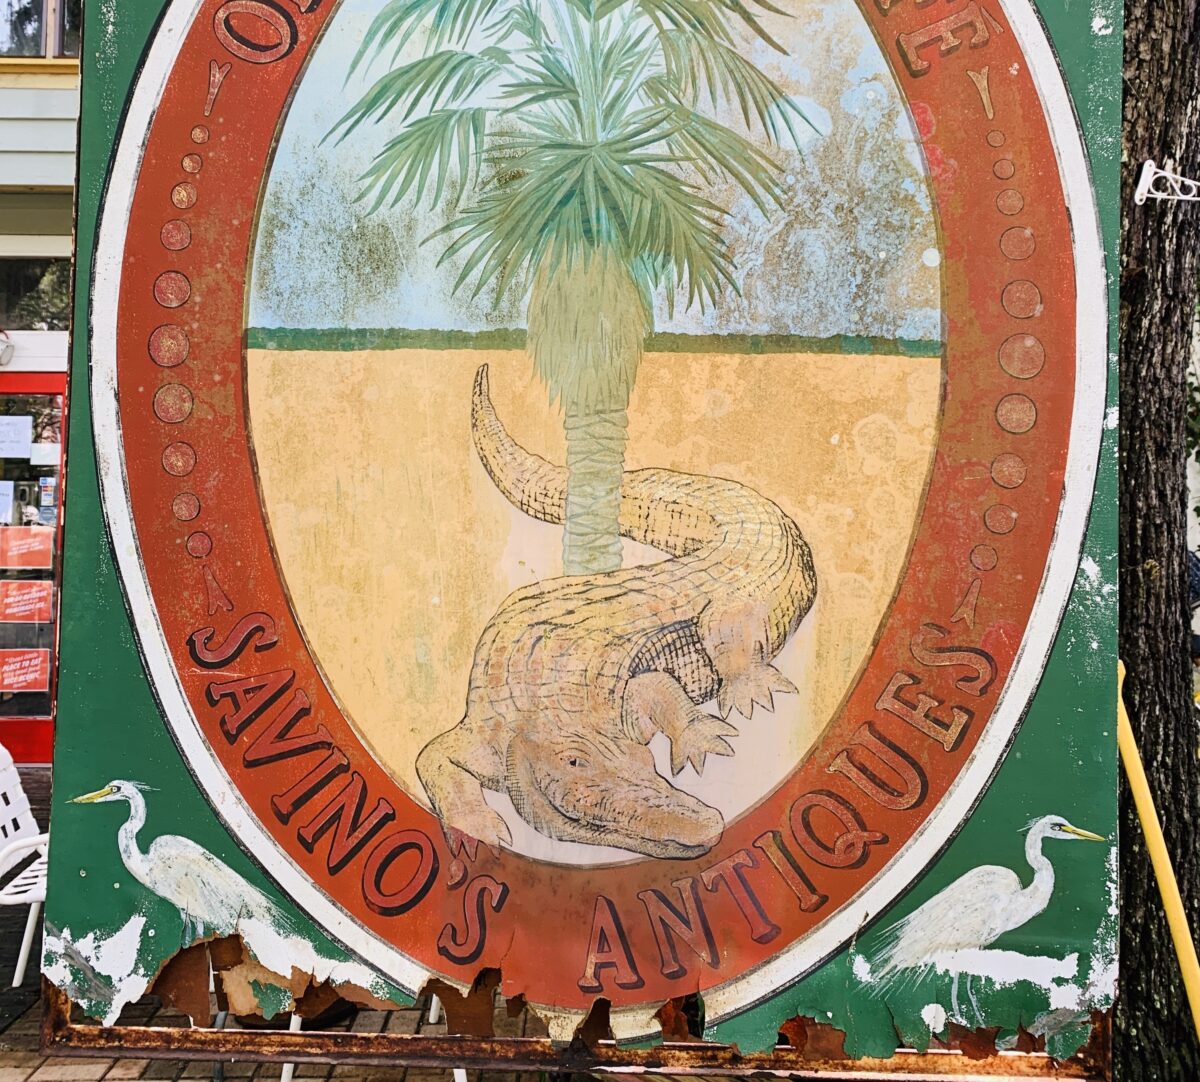  Old antique sign with alligator image in Micanopy FL